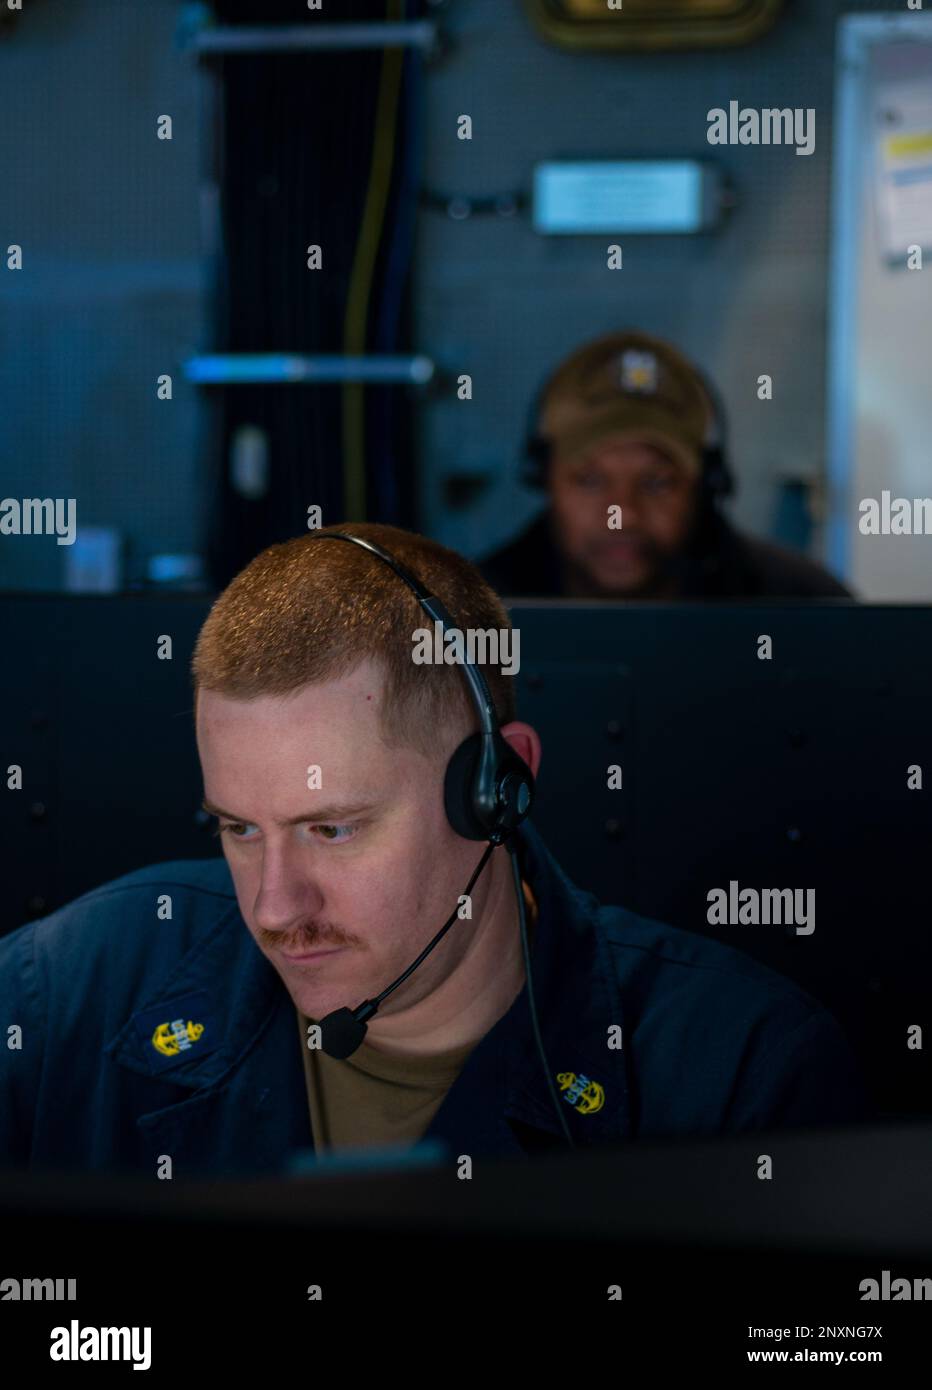 230216-N-WM182-1011 SOUTH CHINA SEA (Feb. 16, 2023) U.S. Navy Chief Machinist’s Mate Devin Stumpf, from Teaneck, N.J., stands watch in the Tactical Flag Communication Center aboard the aircraft carrier USS Nimitz (CVN 68). Nimitz is in U.S. 7th Fleet conducting routine operations. 7th Fleet is the U.S. Navy's largest forward-deployed numbered fleet, and routinely interacts and operates with Allies and partners in preserving a free and open Indo-Pacific region. Stock Photo